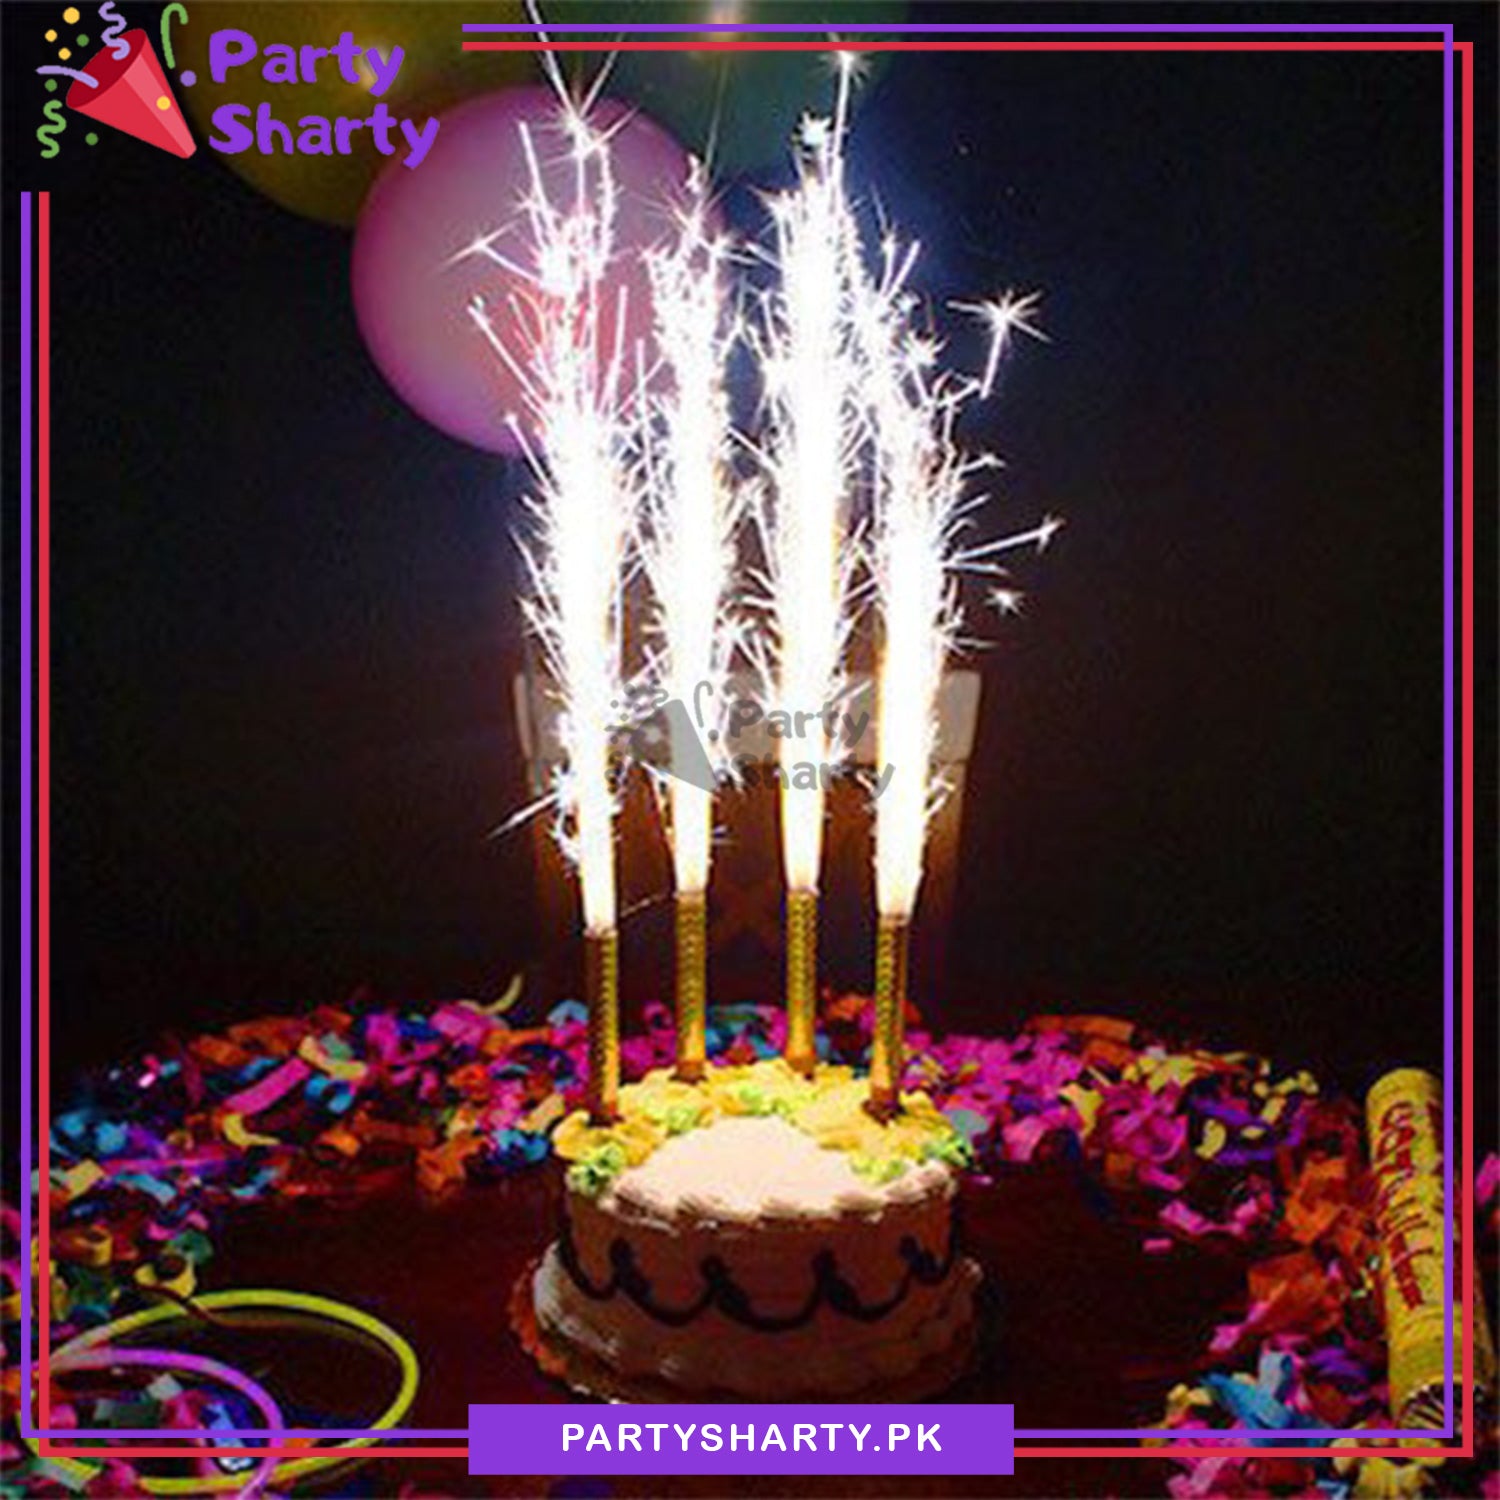 Birthday Sparkling Candles - Pack of 6 (Multi Color) - 15 cms